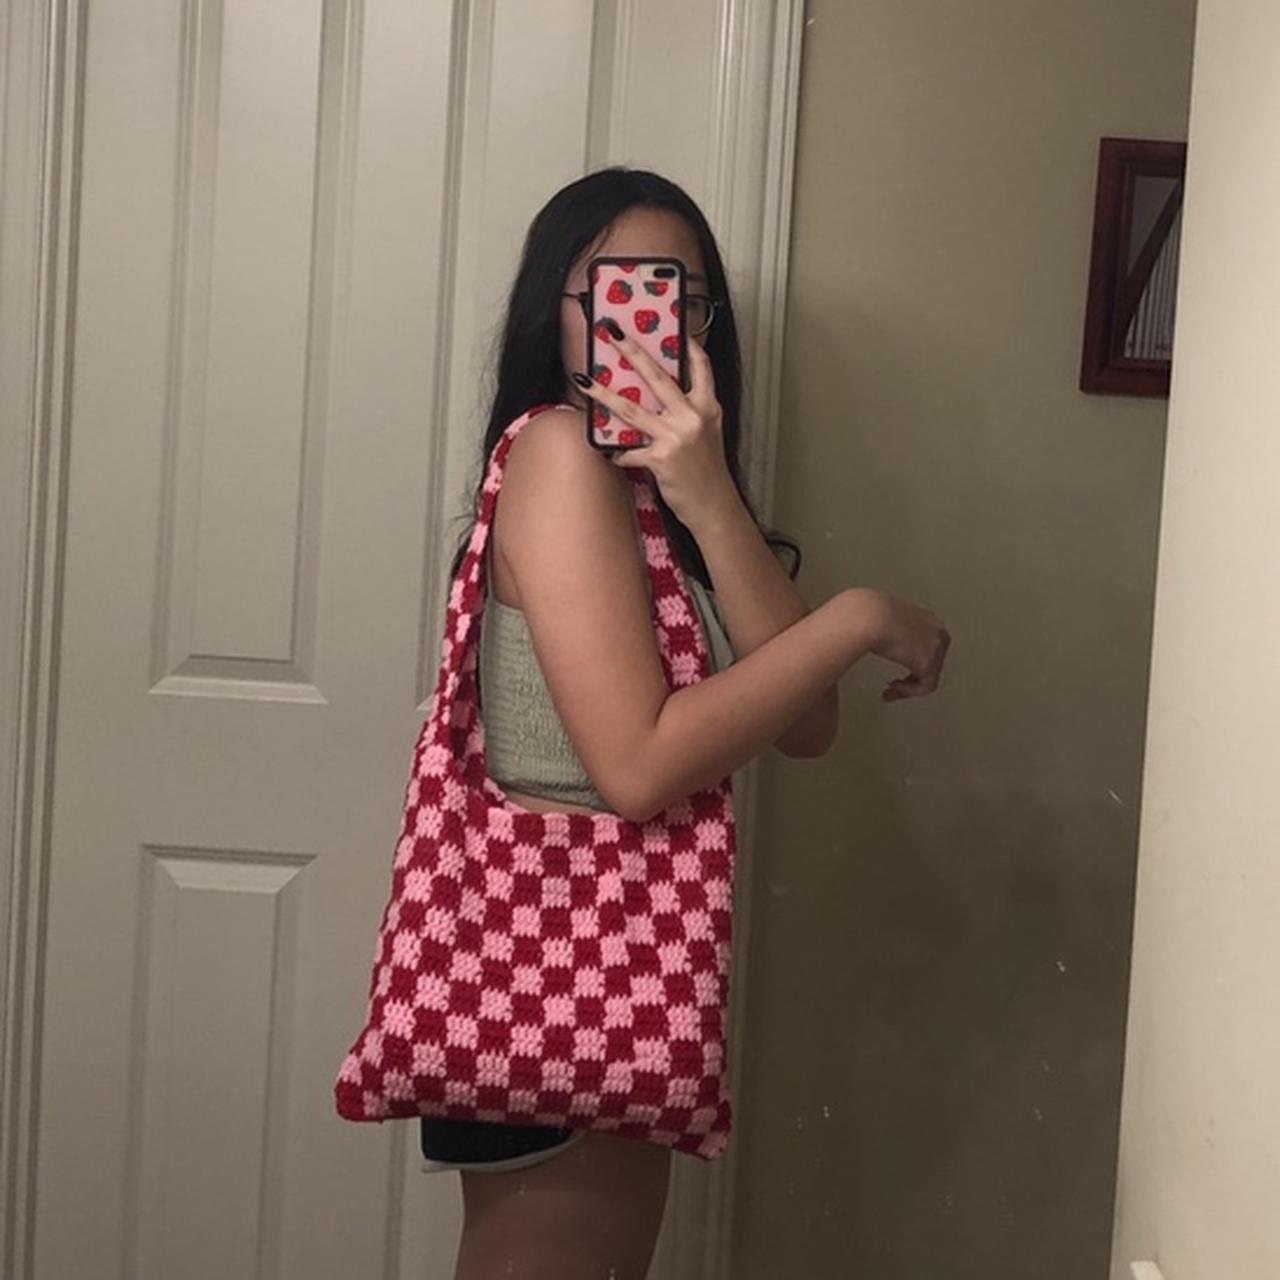 rose checkered tote